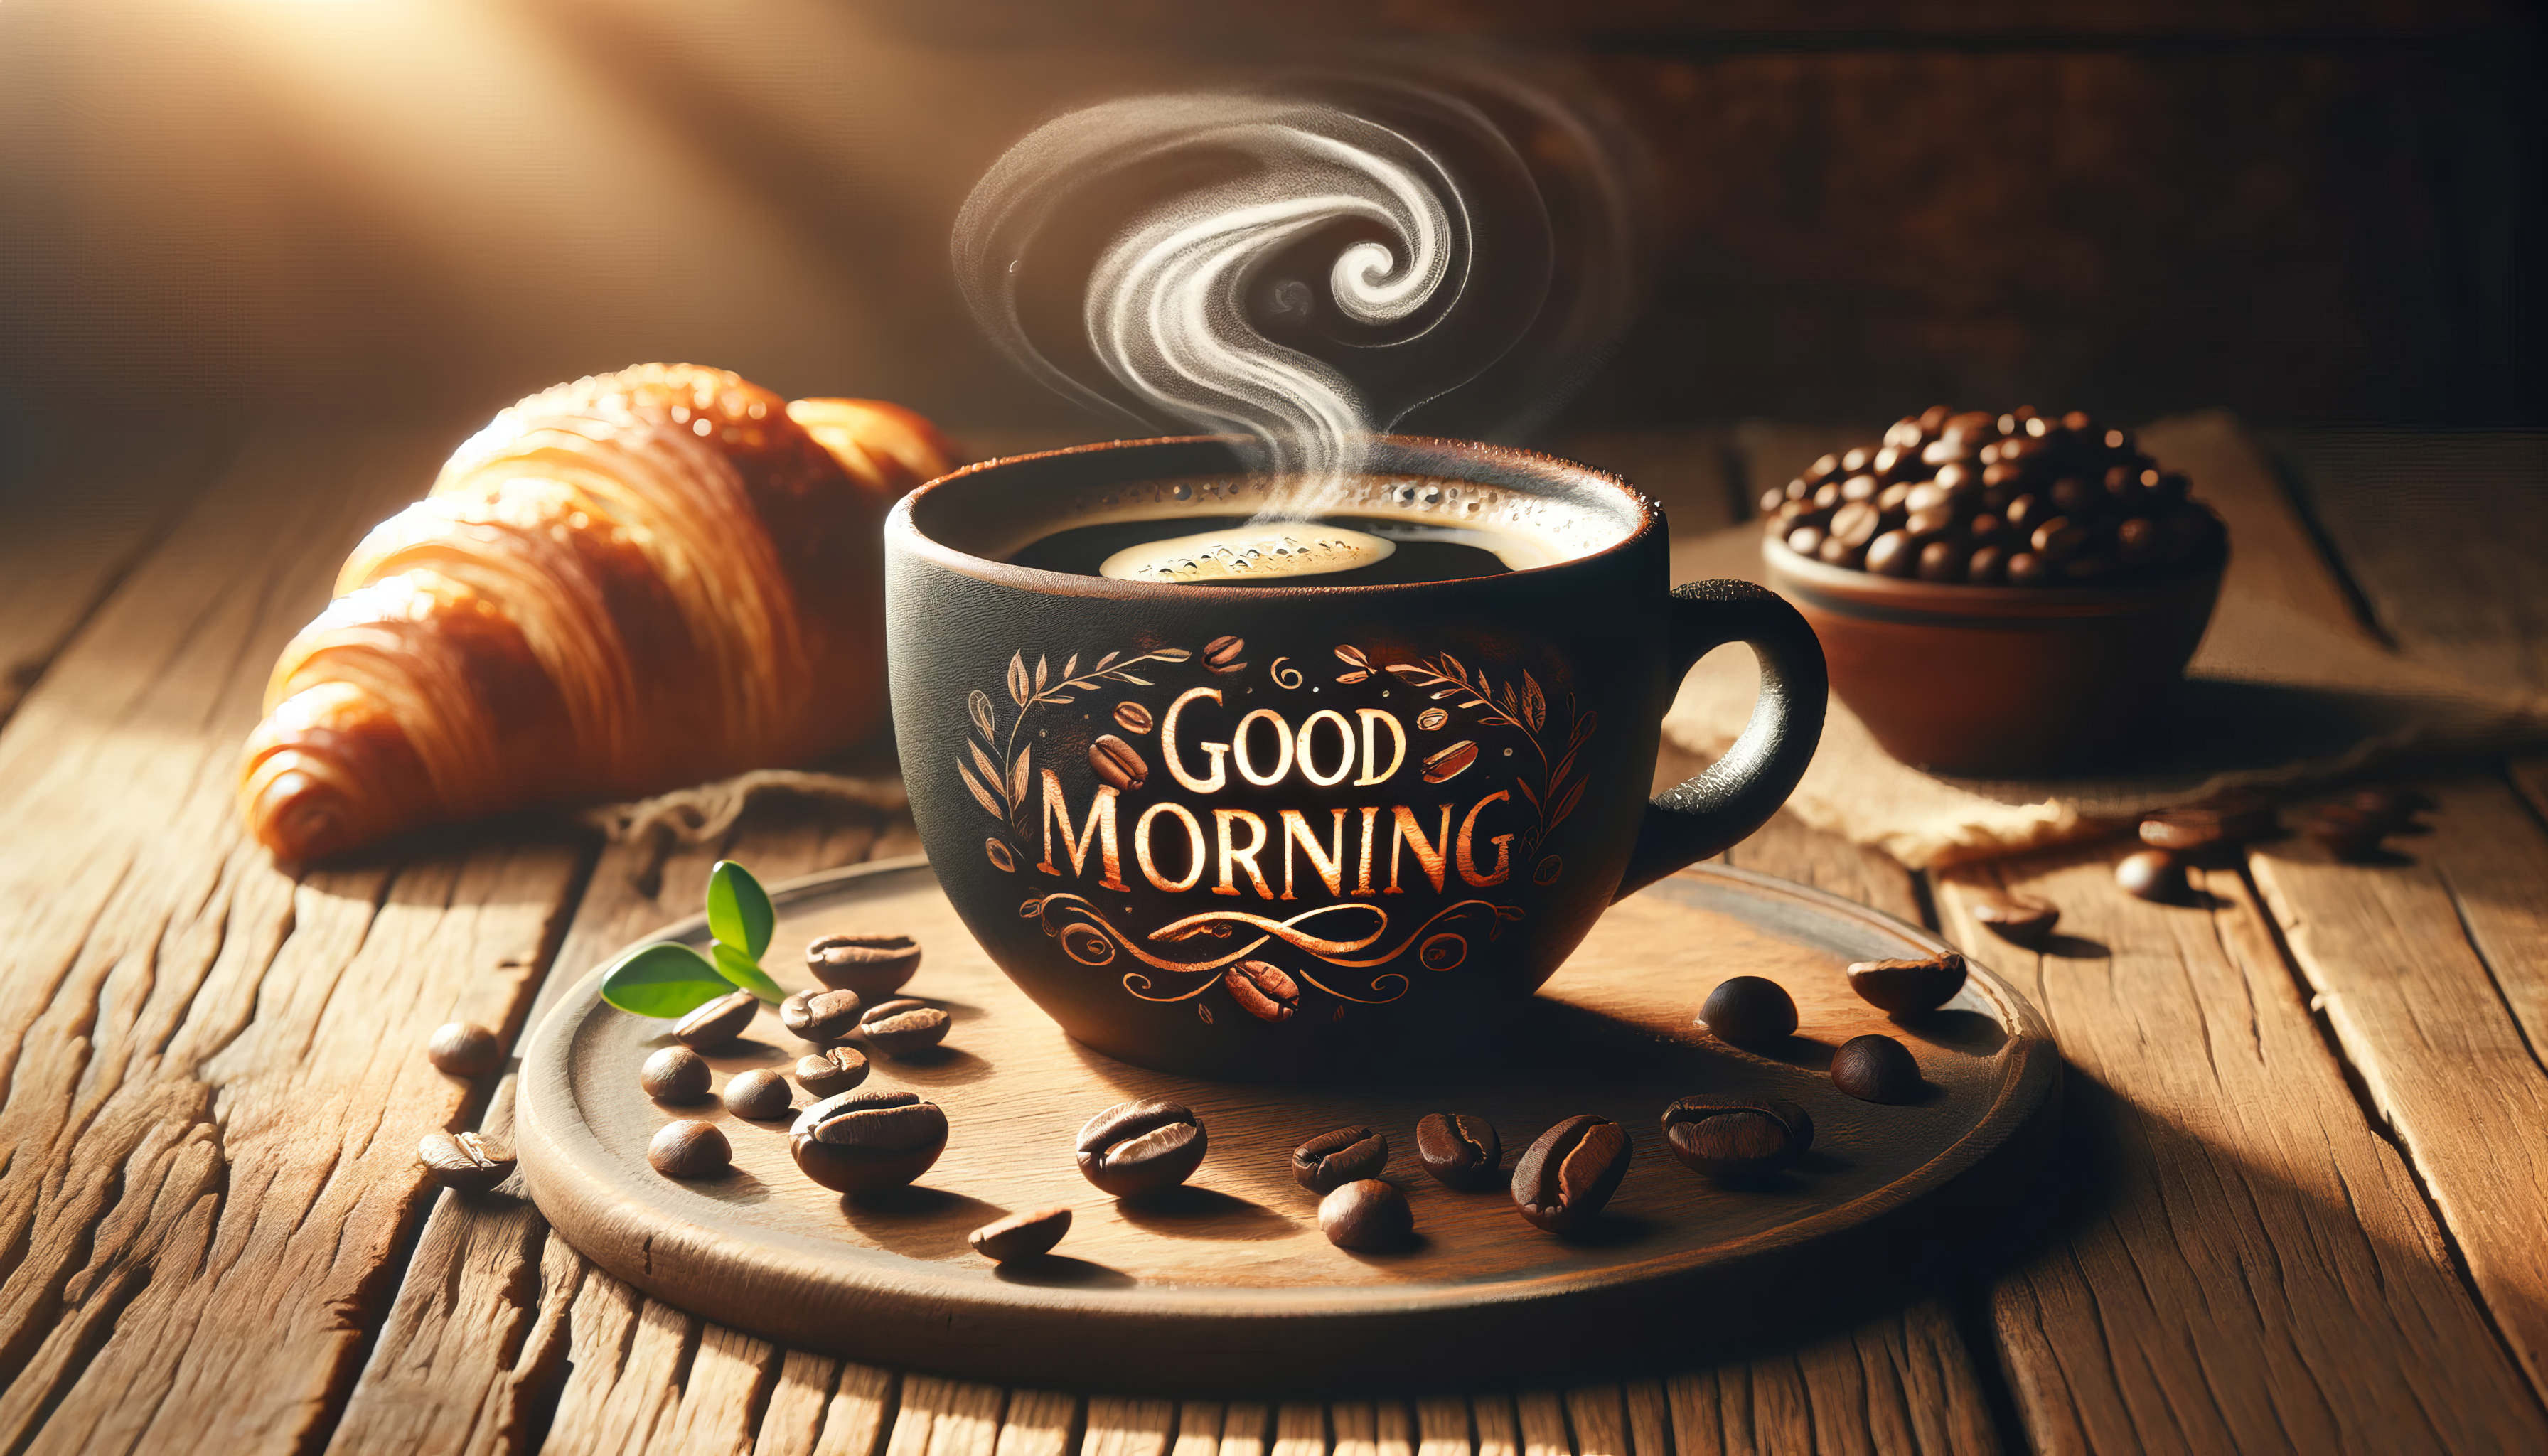 Good morning message on a coffee mug with steam, paired with a fresh croissant and coffee beans on a wooden tray, perfect for a HD desktop wallpaper themed around breakfast.